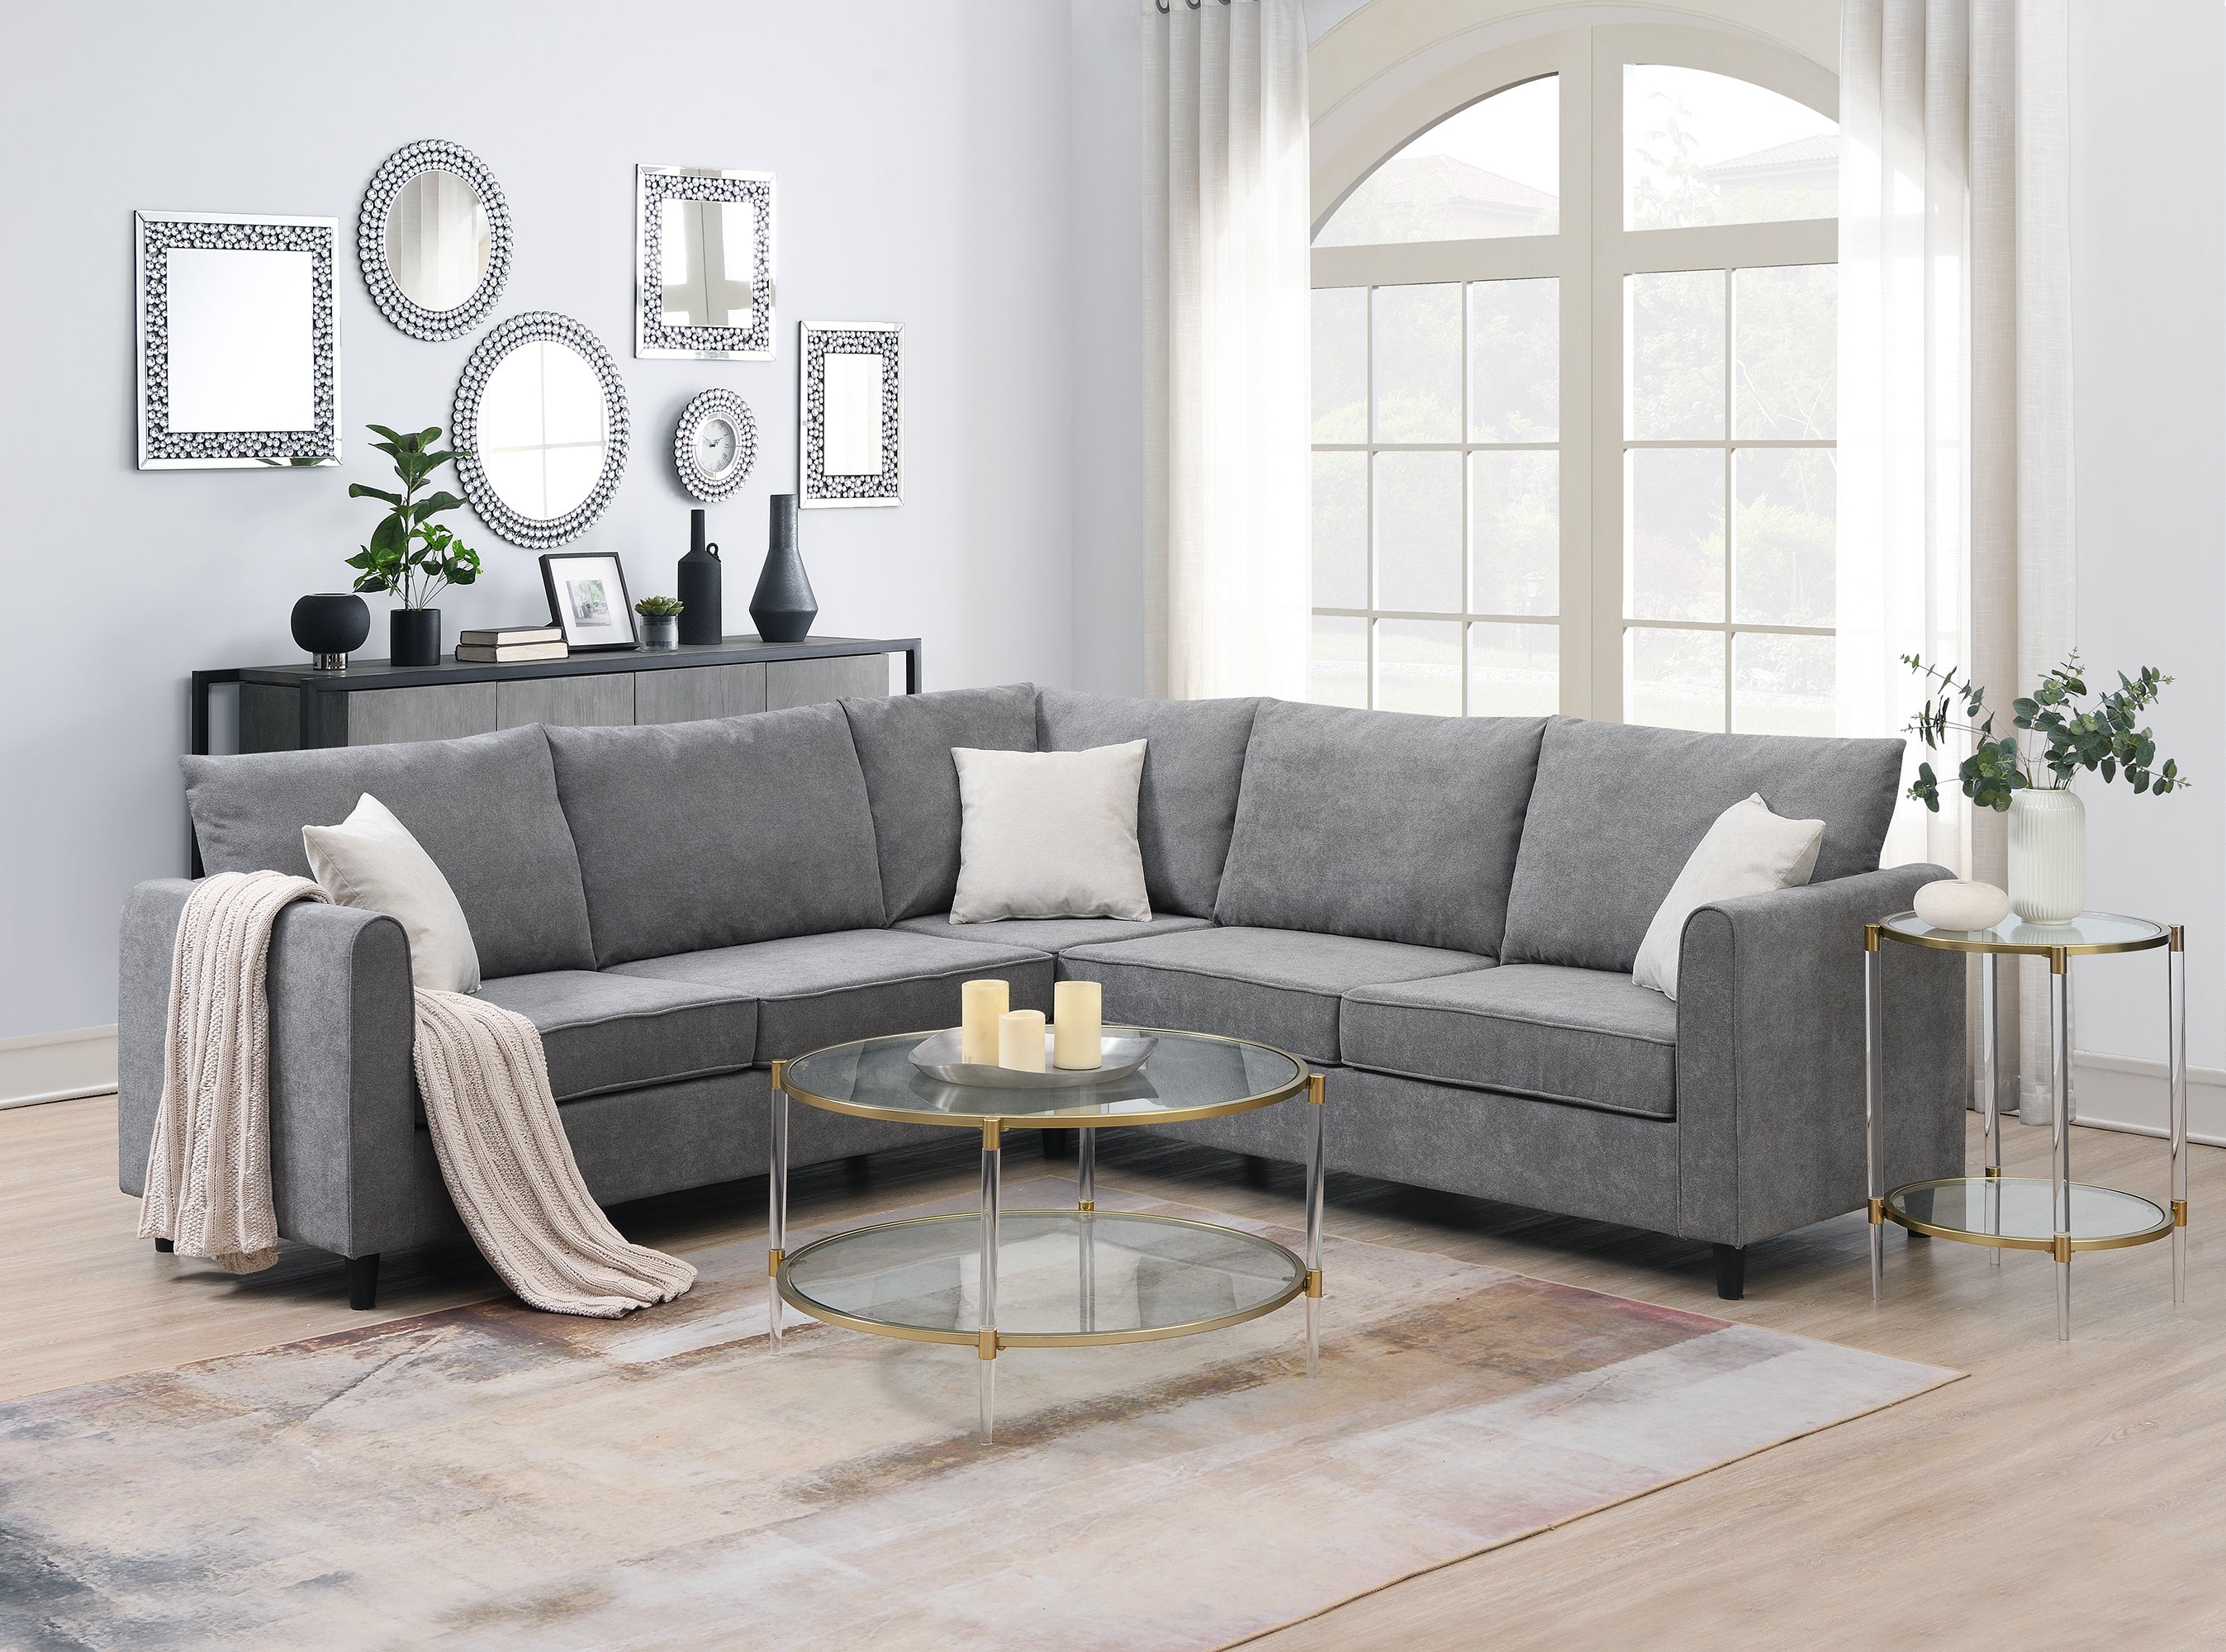 Modern Upholstered Living Room Sectional Sofa / L Shape Furniture Couch with 3 Pillows